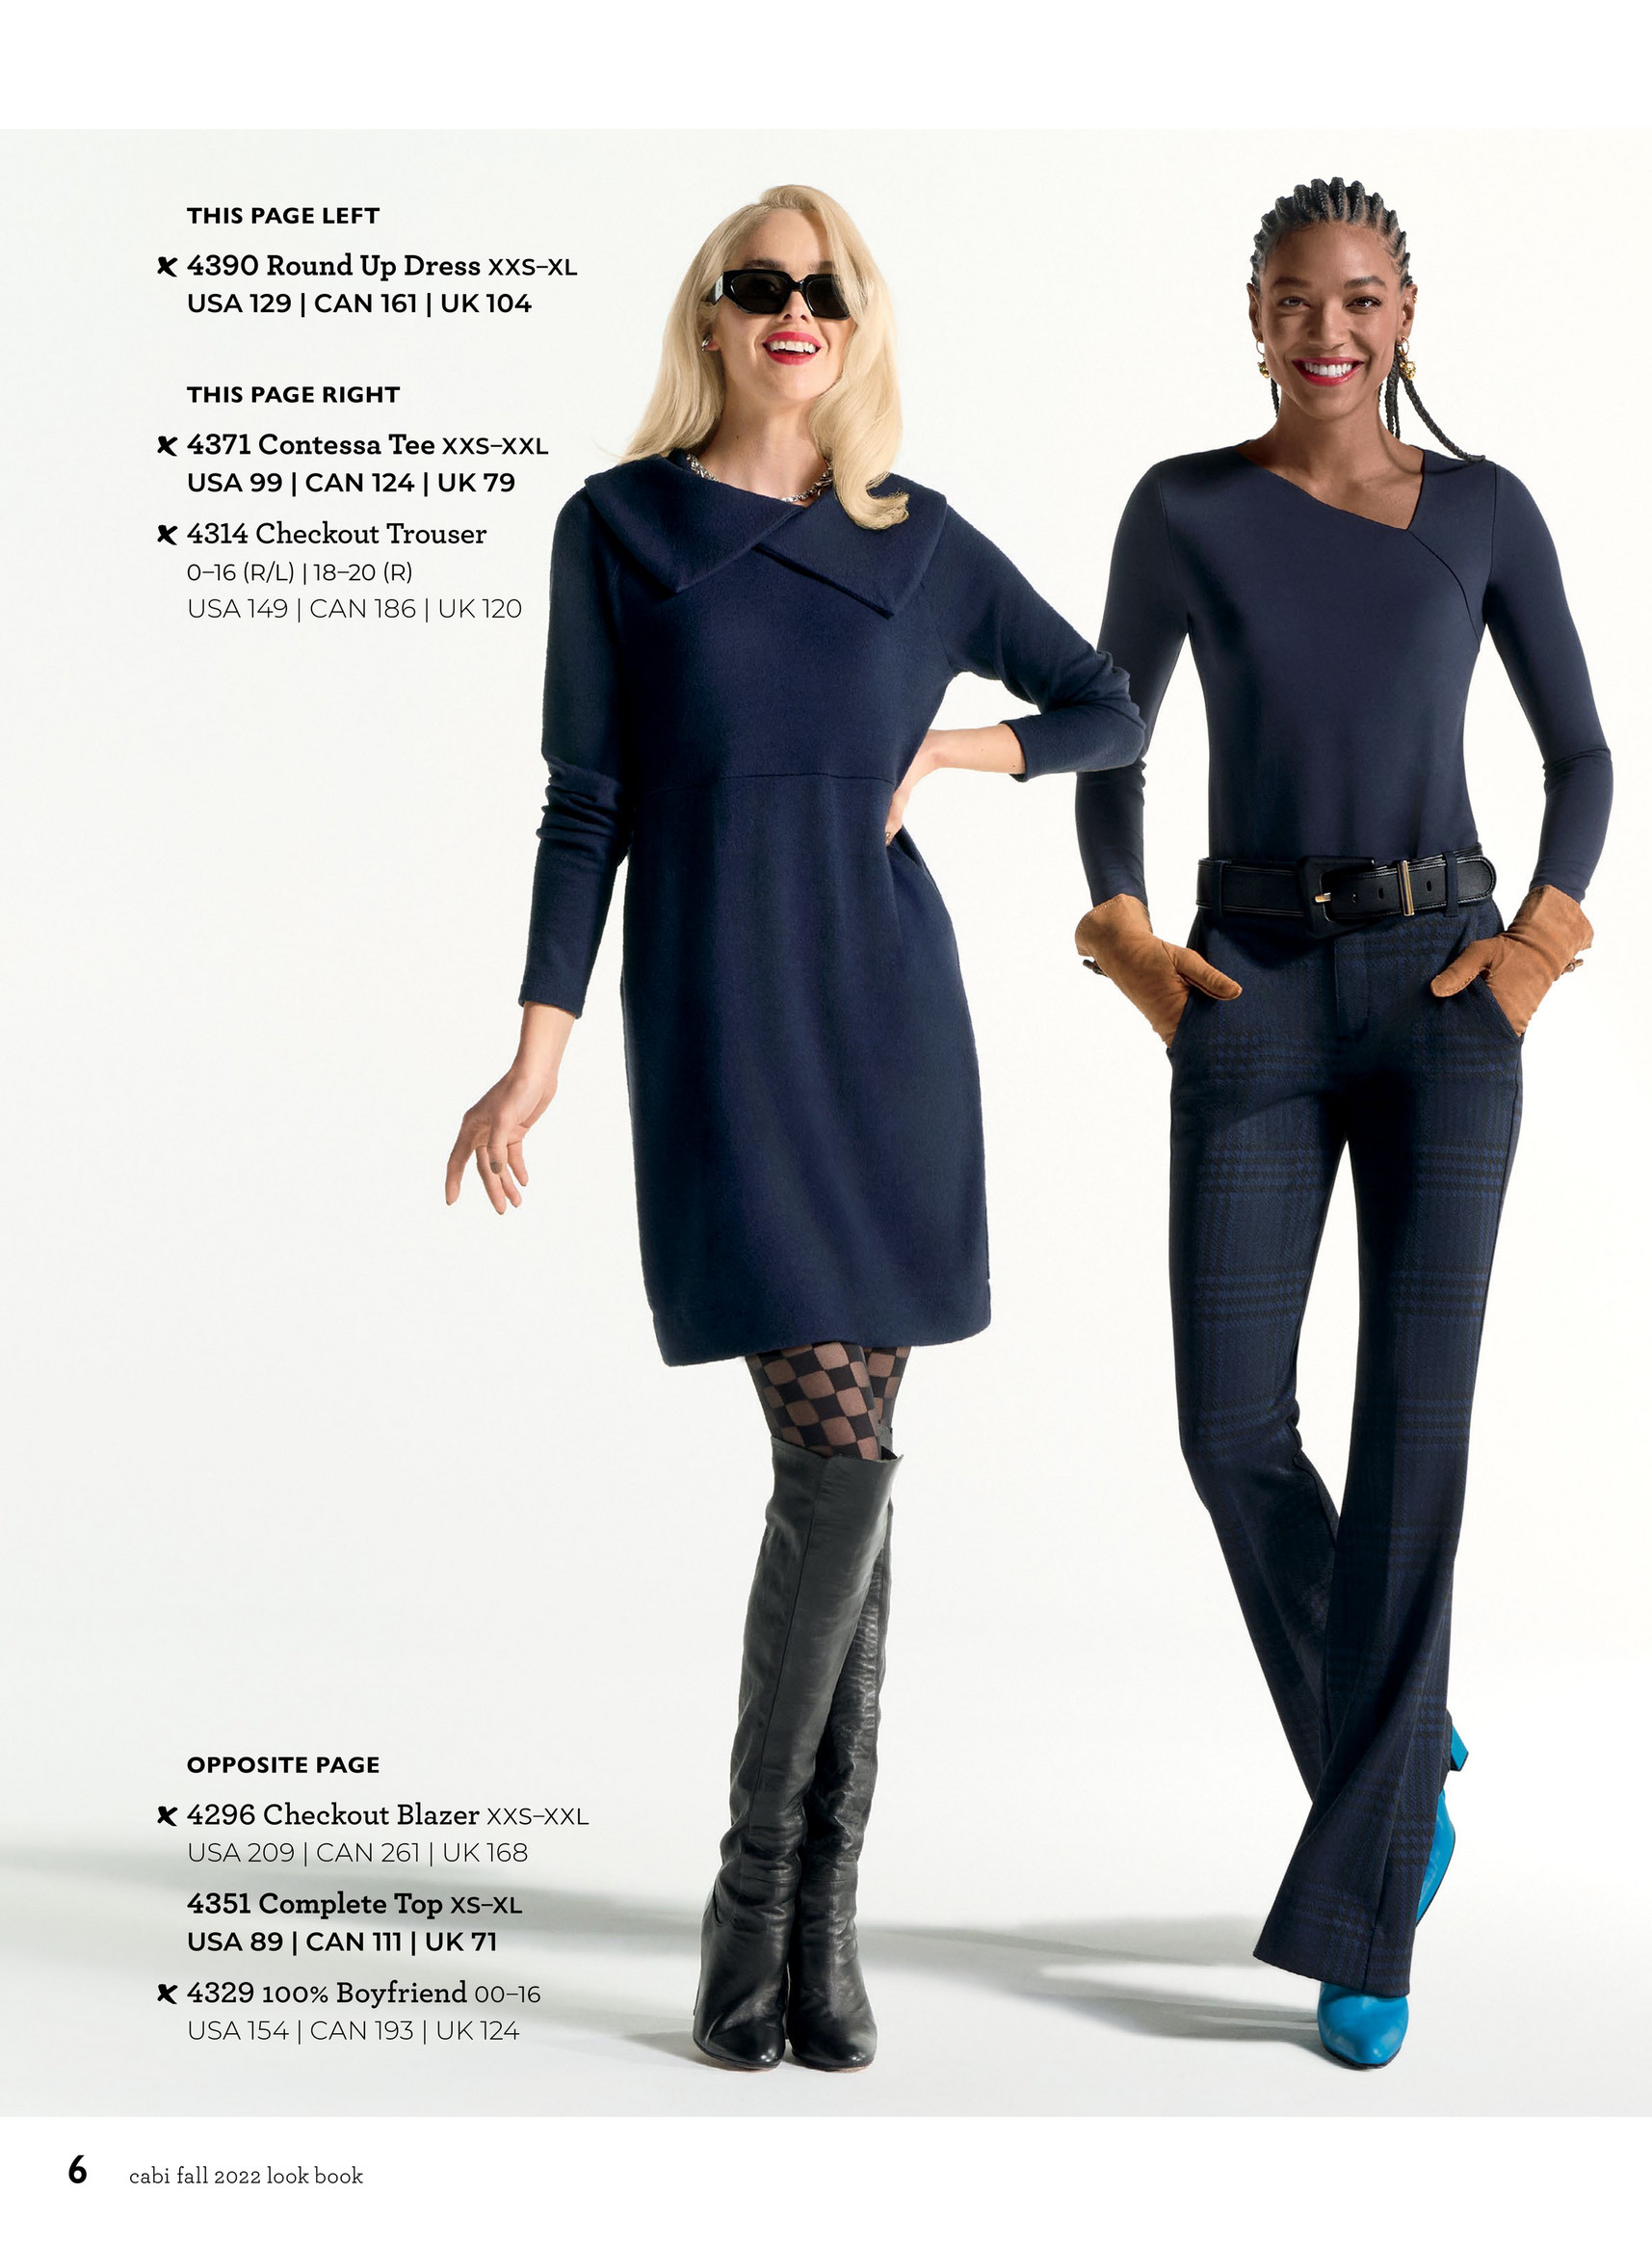 Look Book - cabi Fall 2021 Collection - Page 12-13